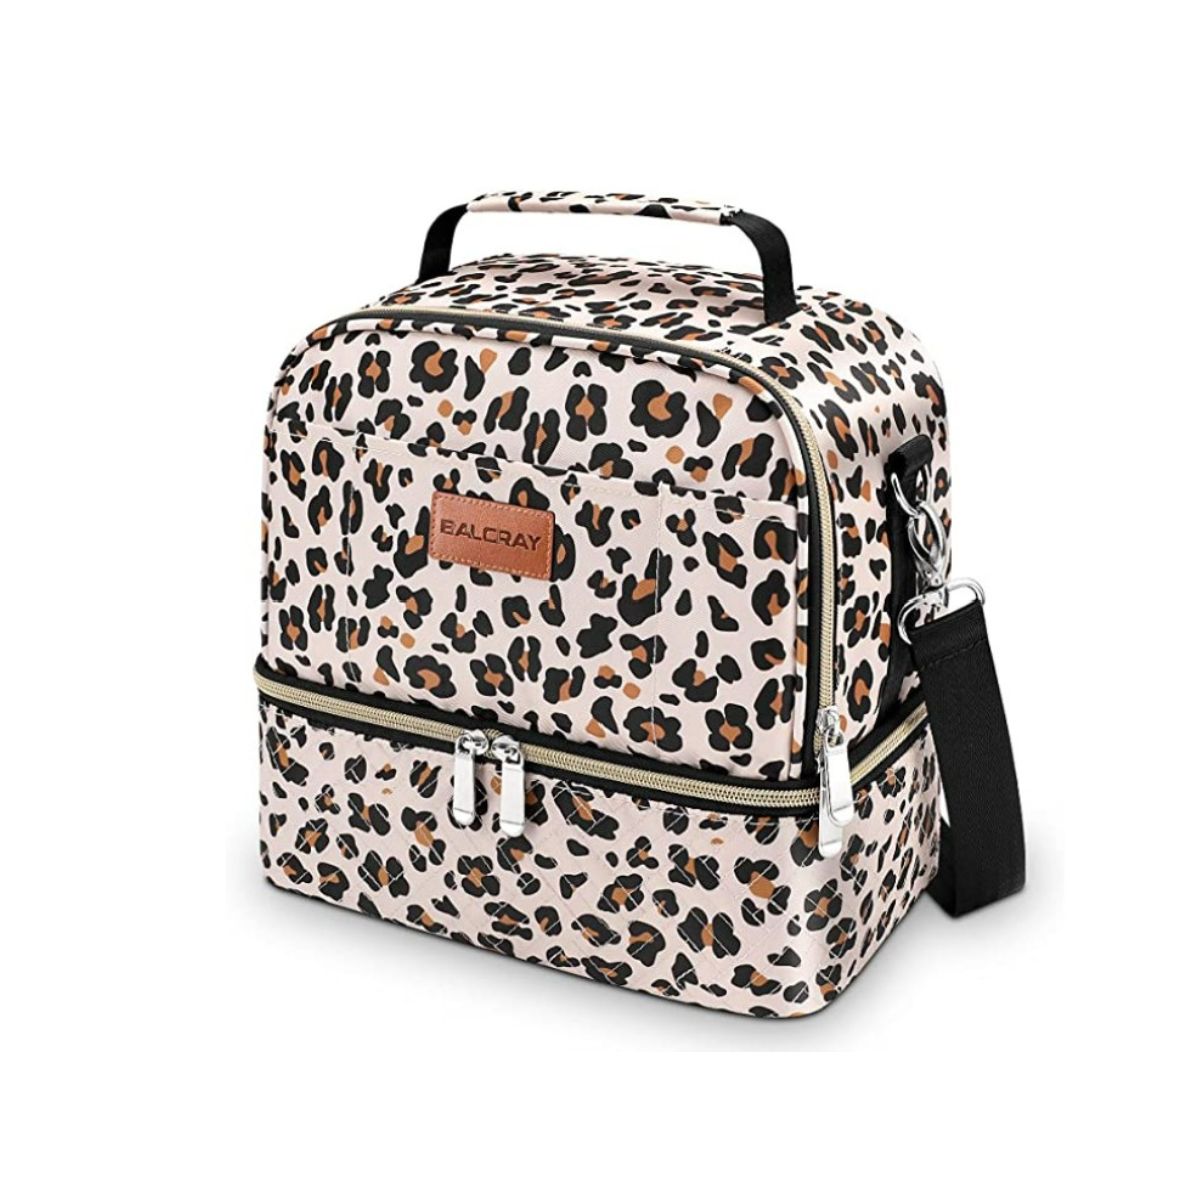 Leopard print insulated lunch box